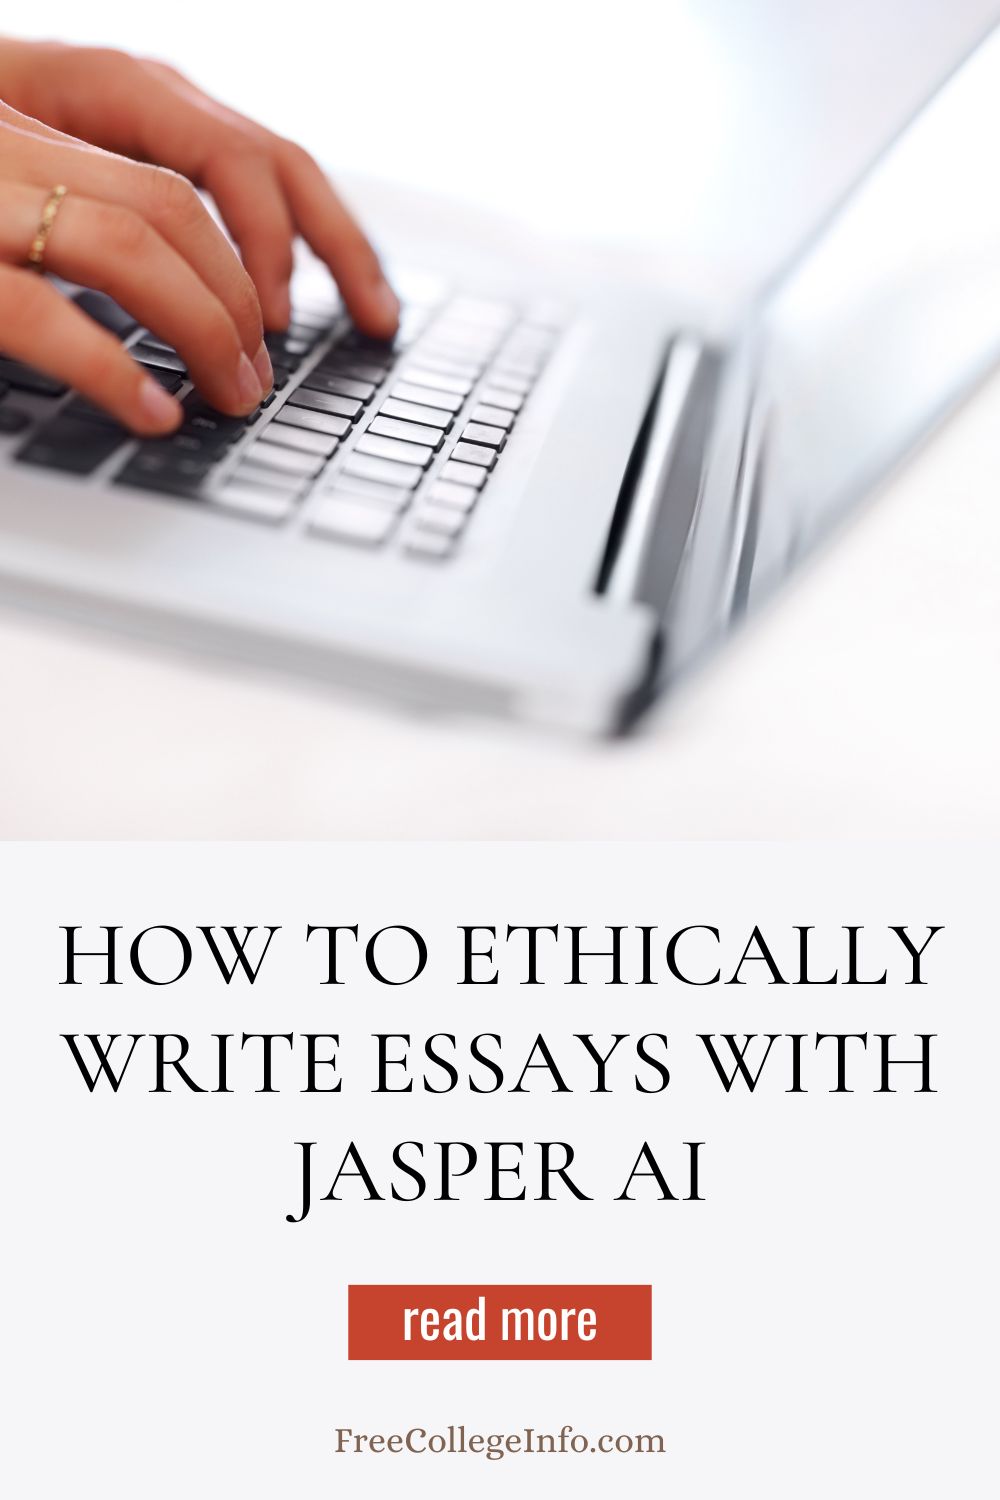 How To Ethically Write Essays With Jasper AI